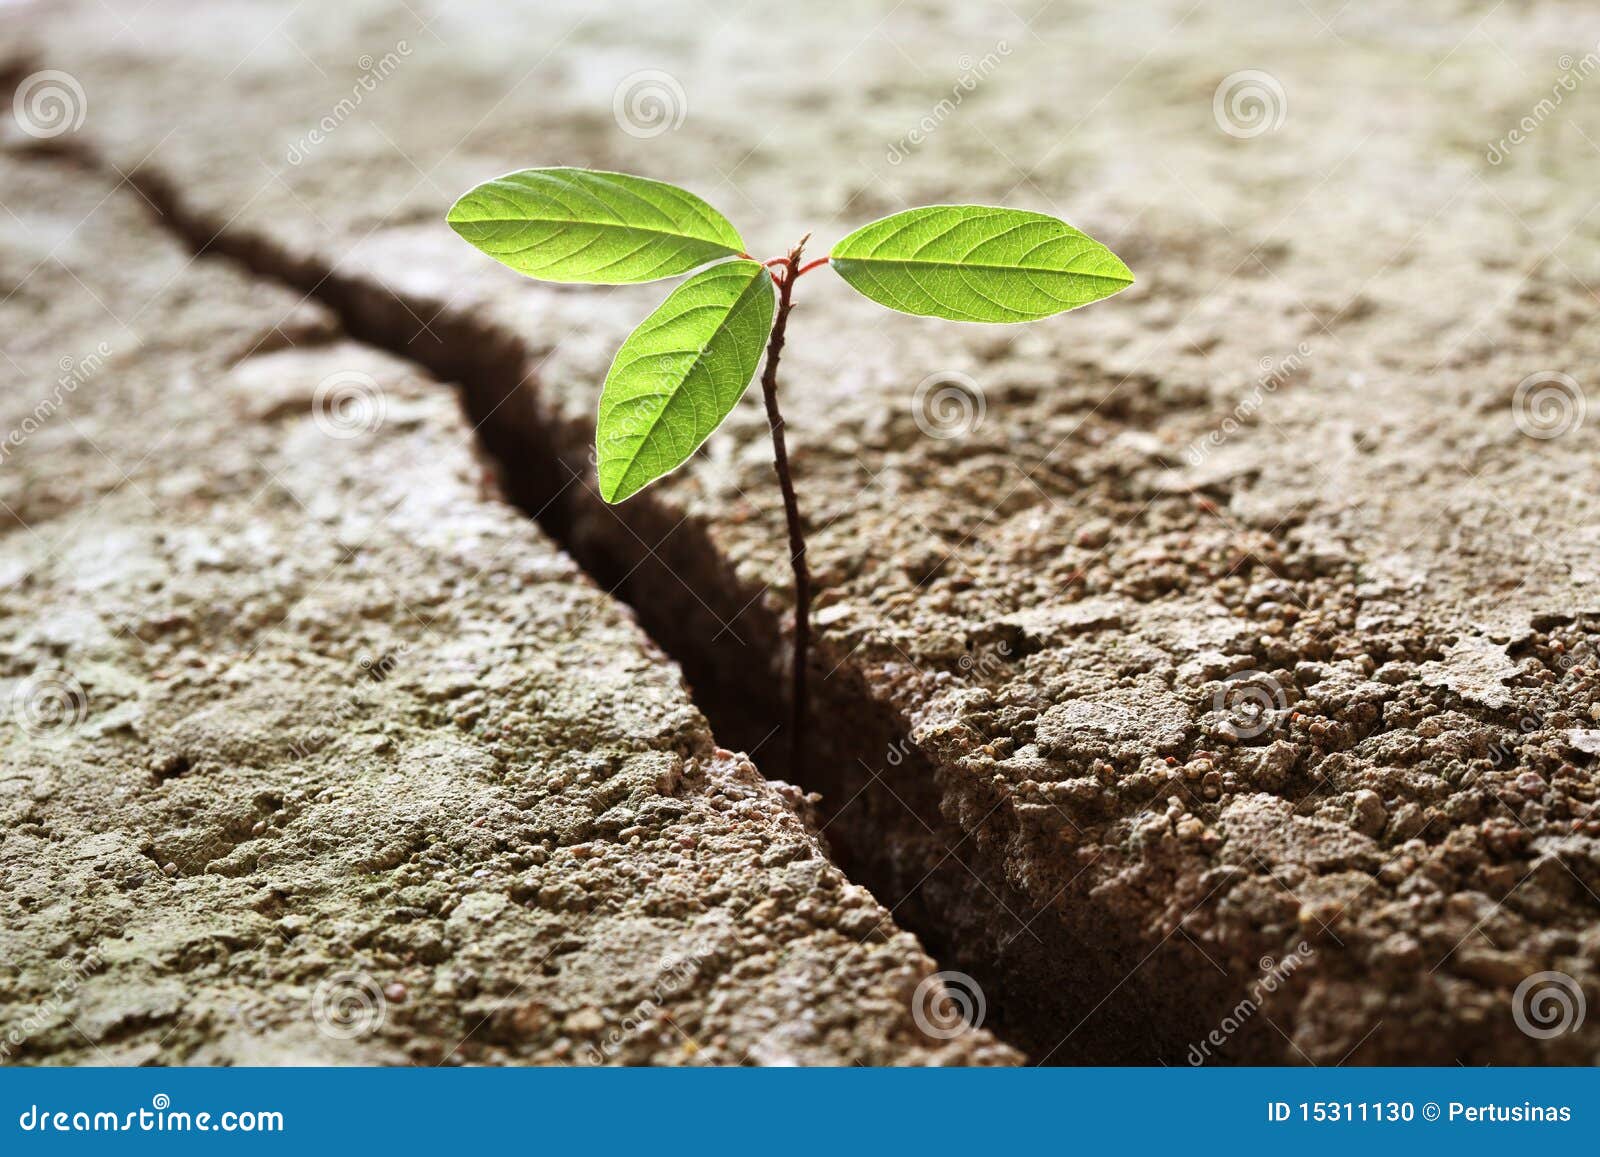 plant growing out of concrete